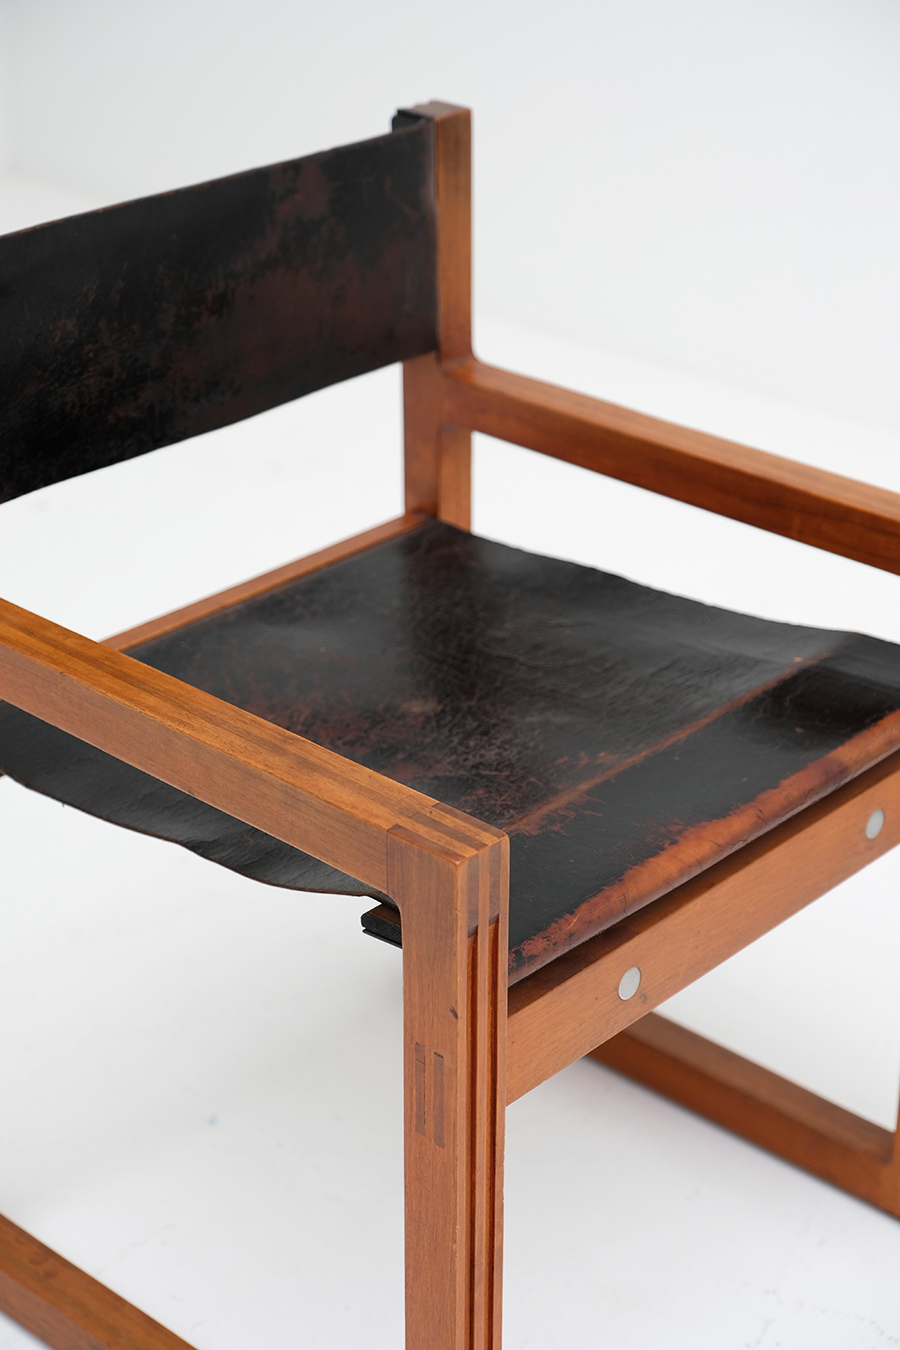 Christophe Gevers Chairs for De Coeneimage 12